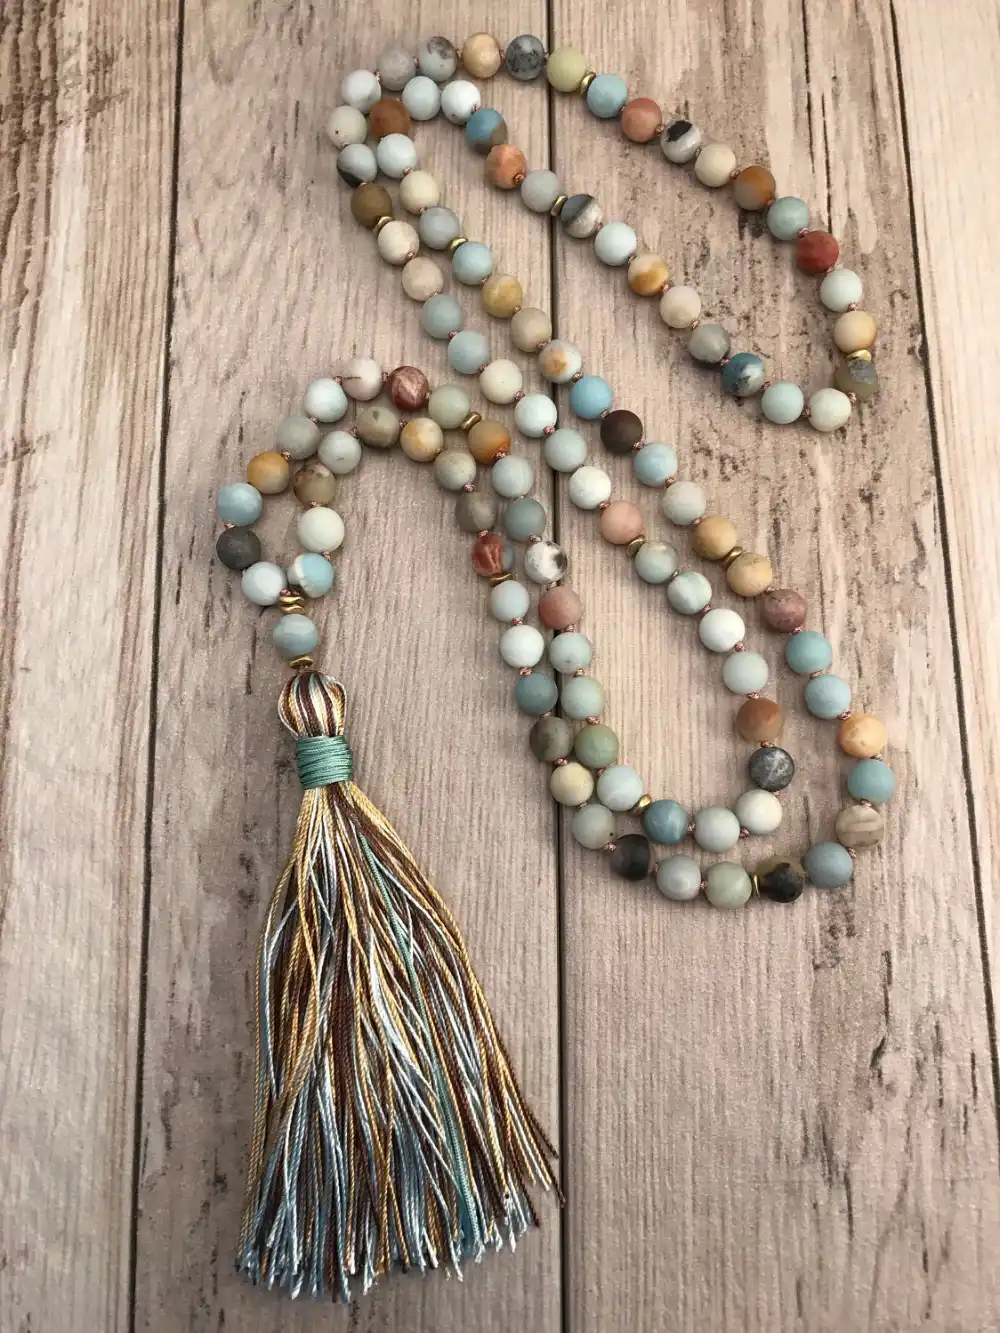 Hand-Knotted White Howlite-Black Onyx-Agate Meditation Healing Mala with Silk Tassel and Om Charm